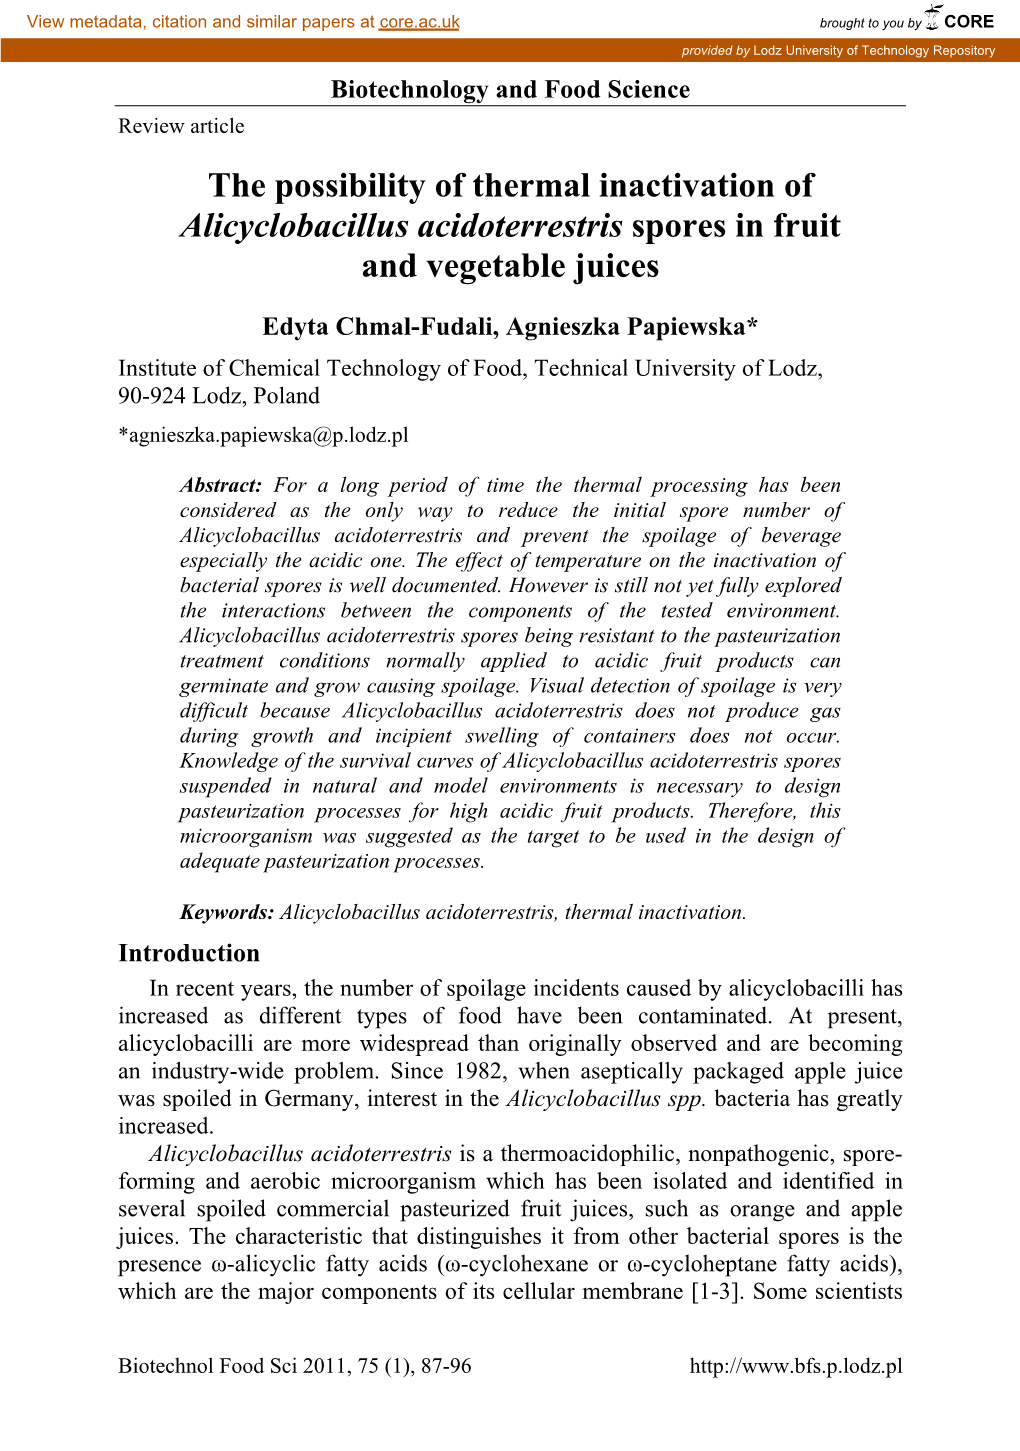 The Possibility of Thermal Inactivation of Alicyclobacillus Acidoterrestris Spores in Fruit and Vegetable Juices